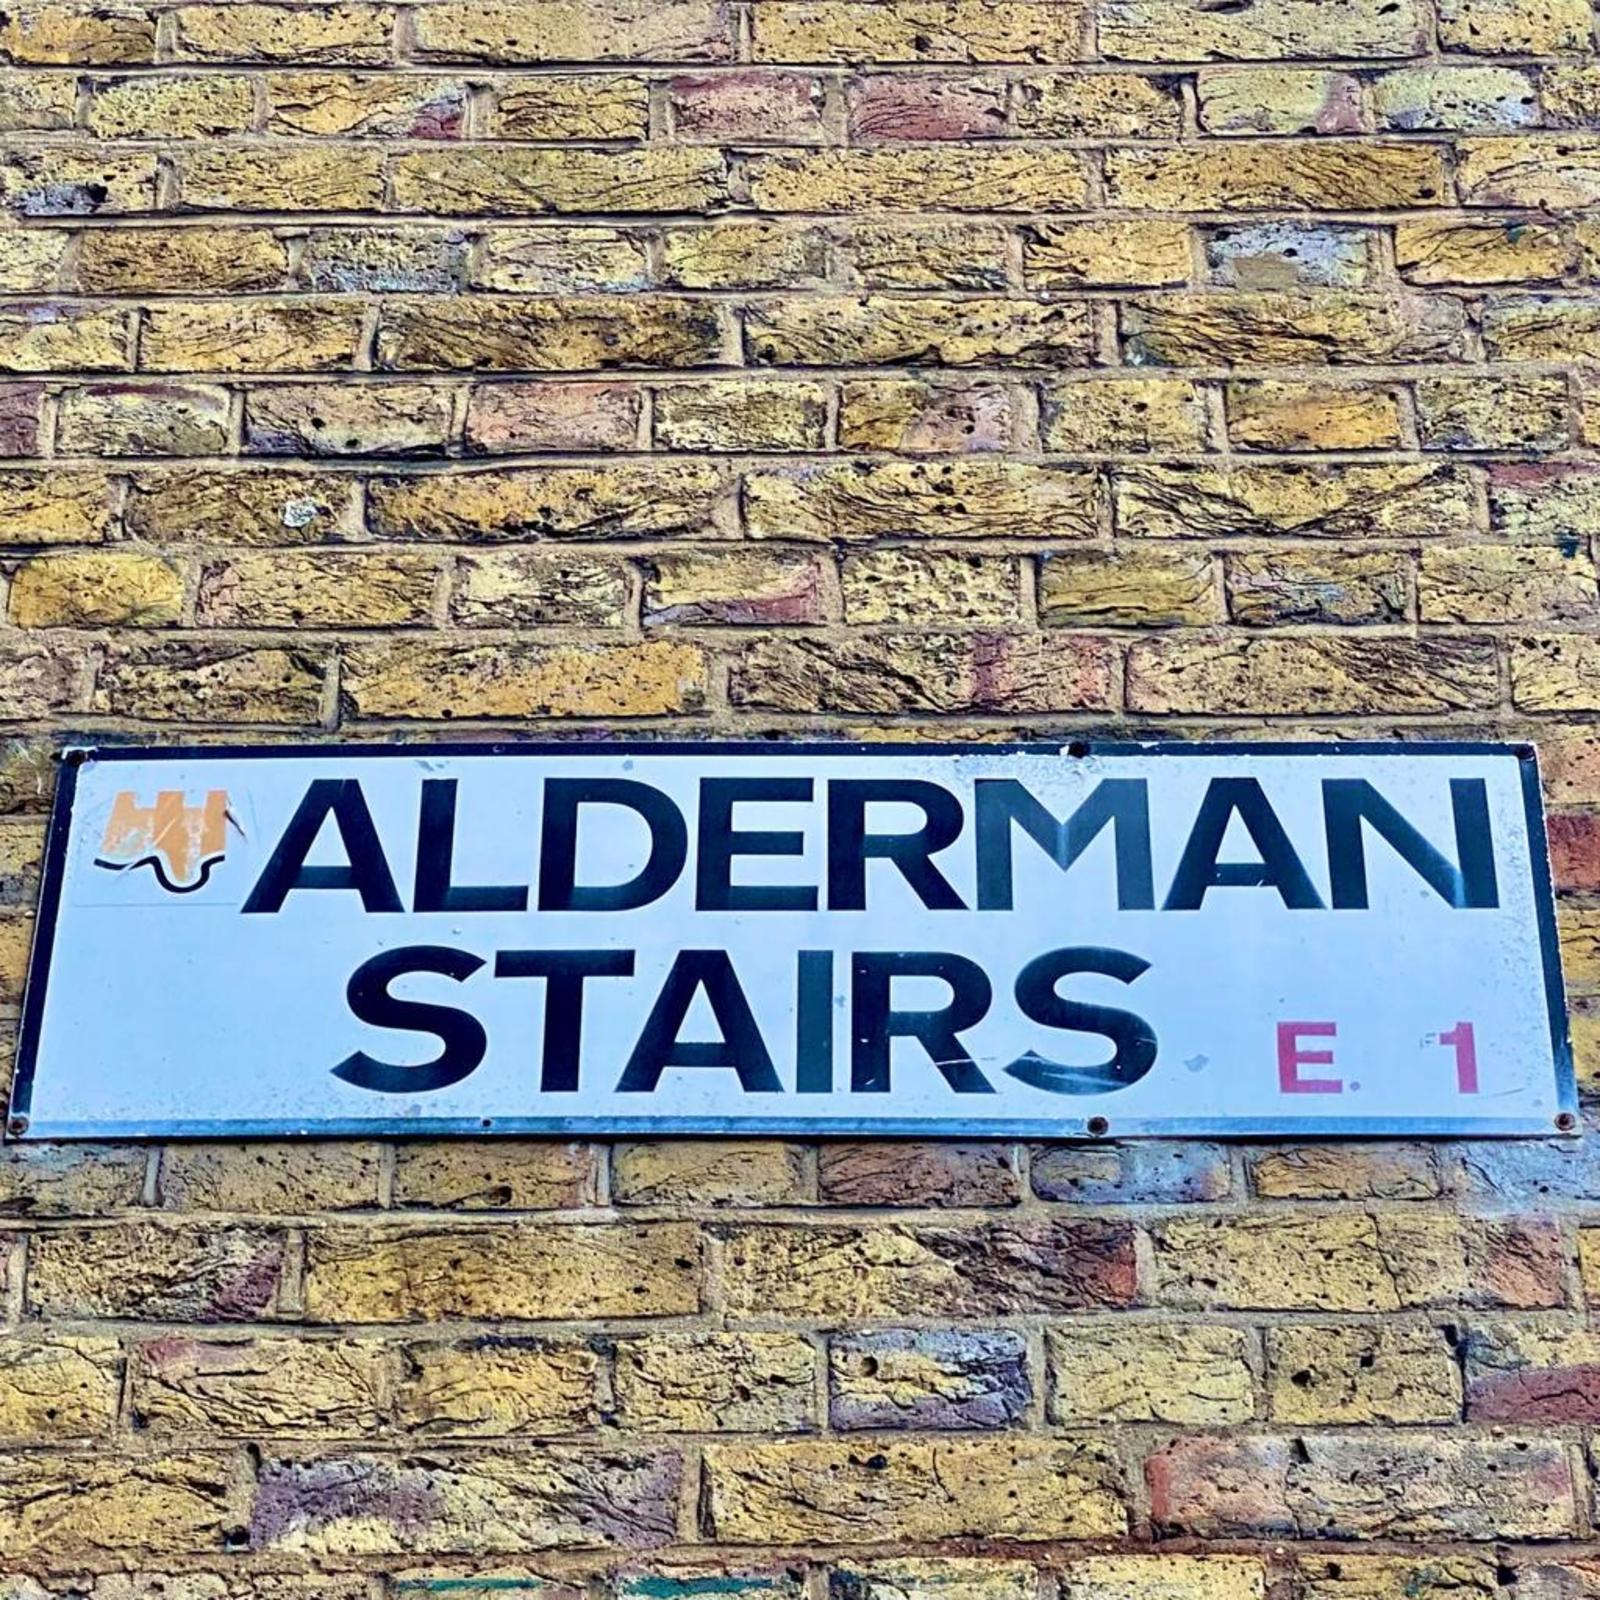 October 2023 - The Alderman’s Steps, first mentioned in 1746, provide a glimpse into a time when The Thames was a bustling place for trade and passenger transport